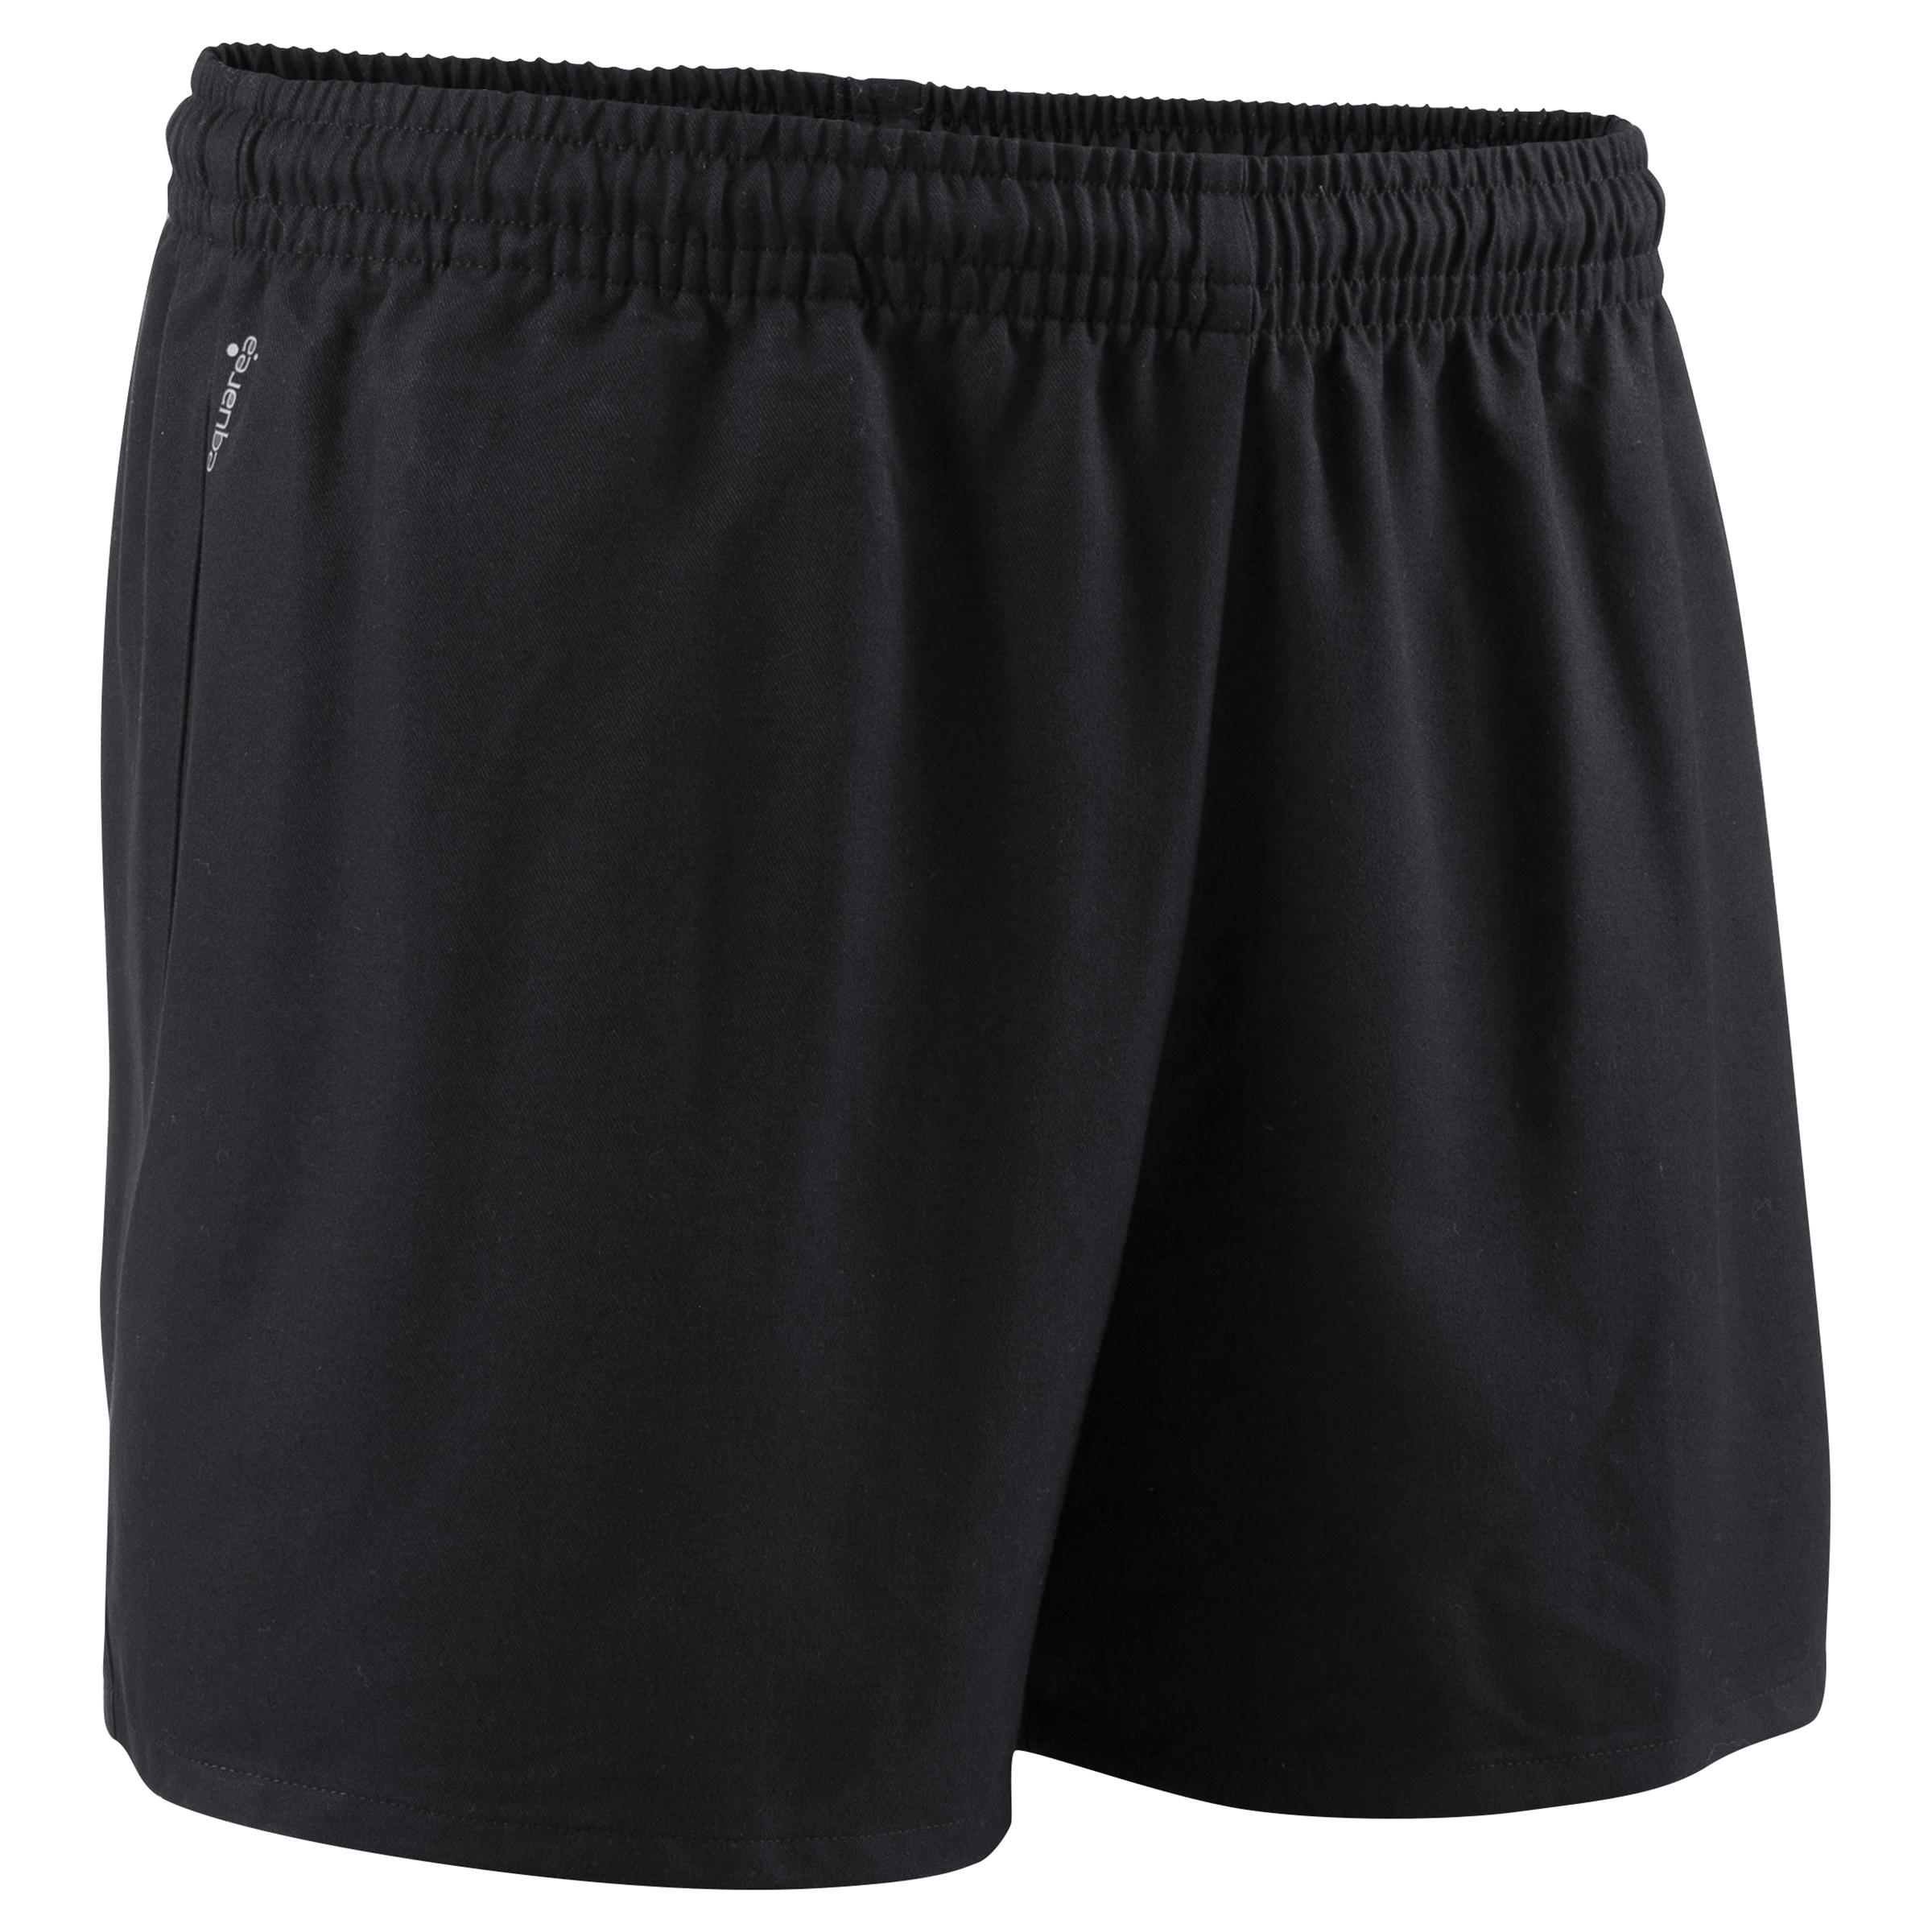 KIPSTA R300 Adult Rugby Shorts - Black